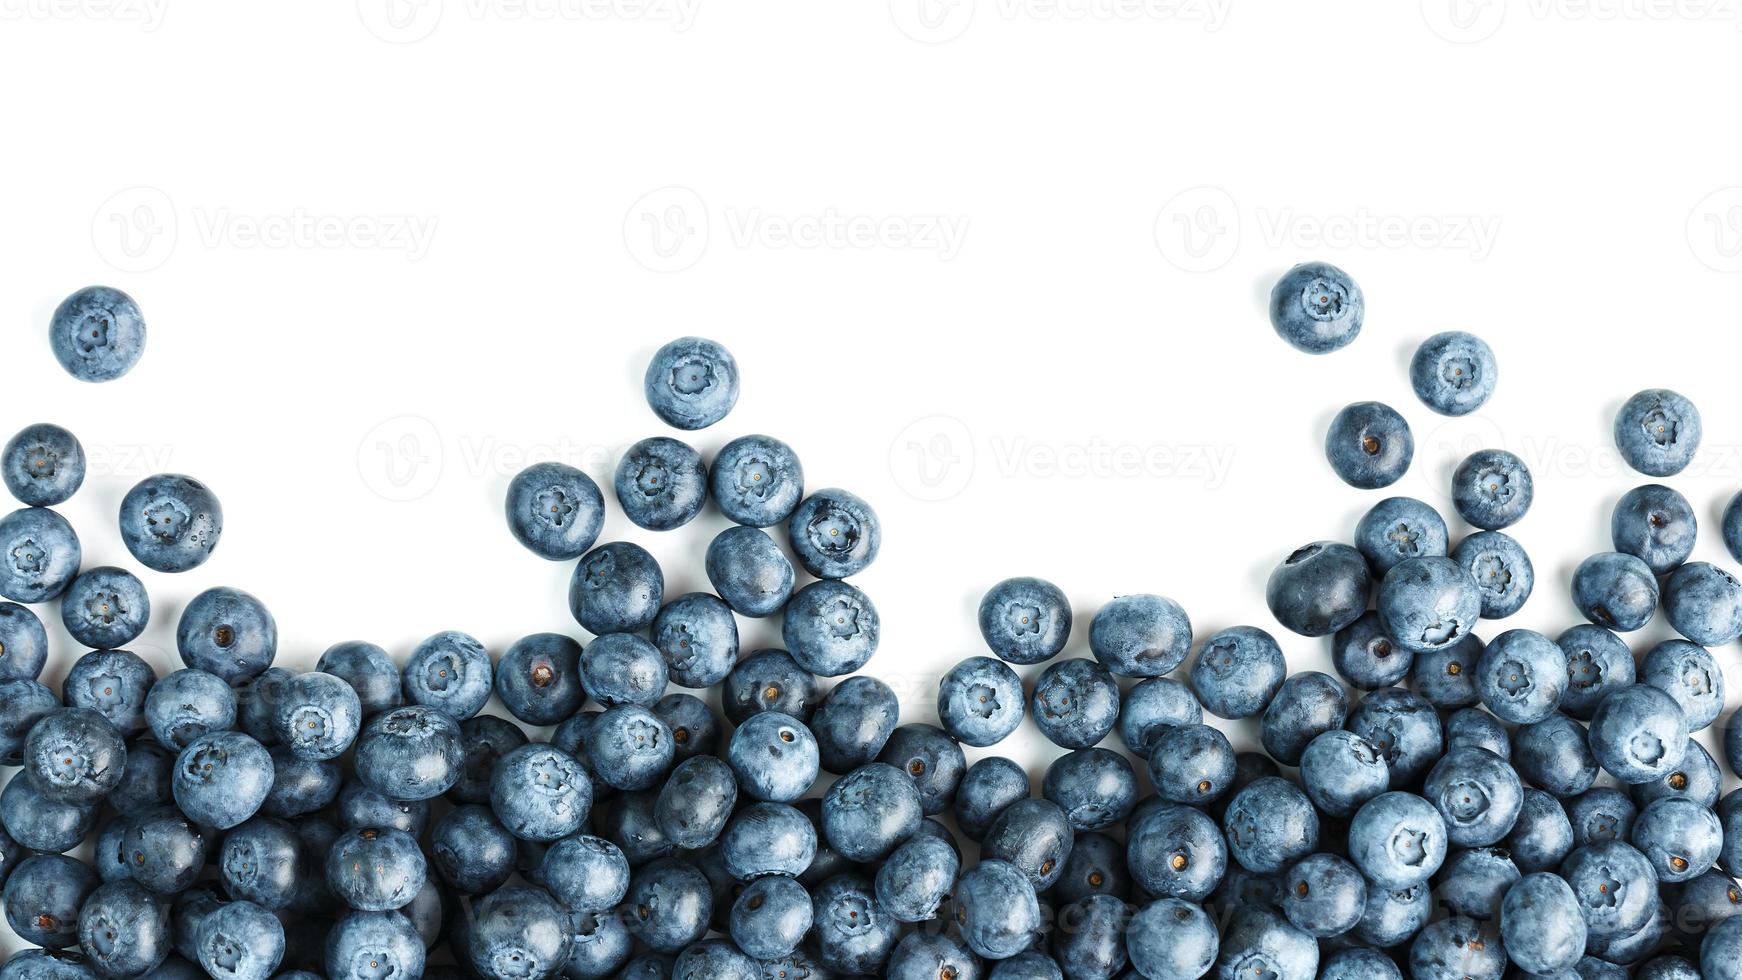 Tasty blueberries fruit are scattered on a white background. Frame photo